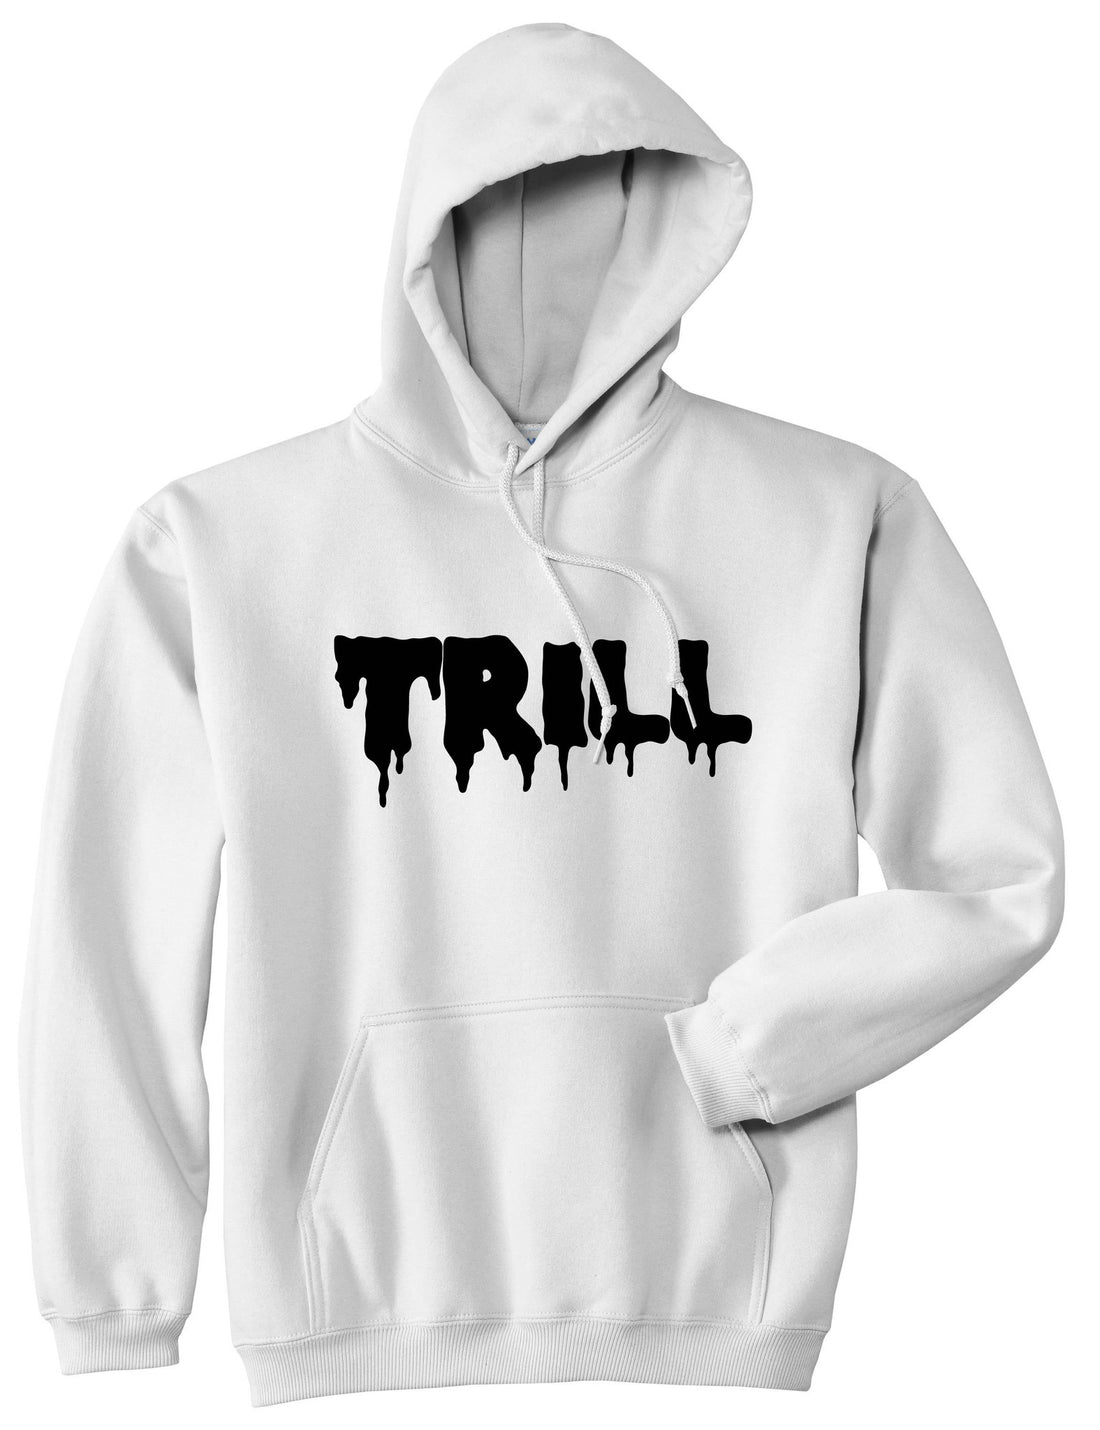 Trill Blood New York Bx Been Style Fashion Boys Kids Pullover Hoodie Hoody in White by Kings Of NY